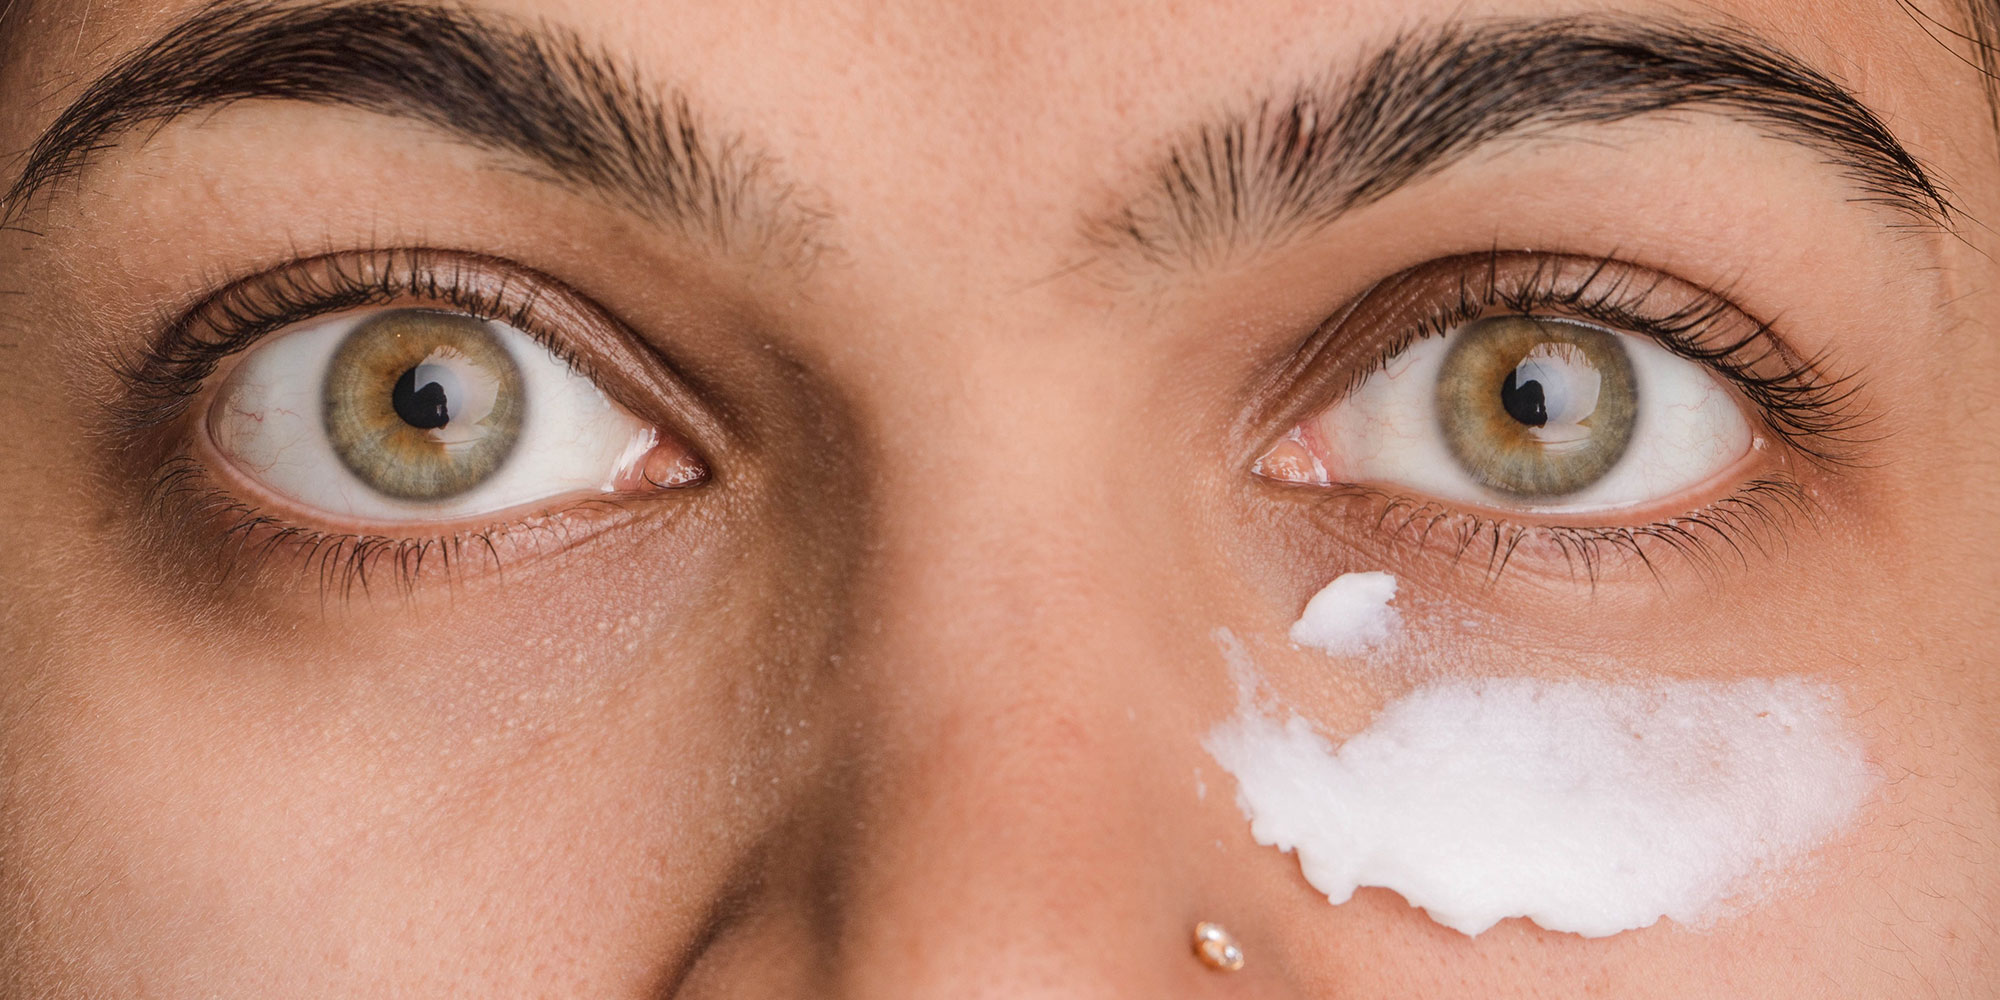 HOW TO GET RID OF DARK CIRCLES OVERNIGHT